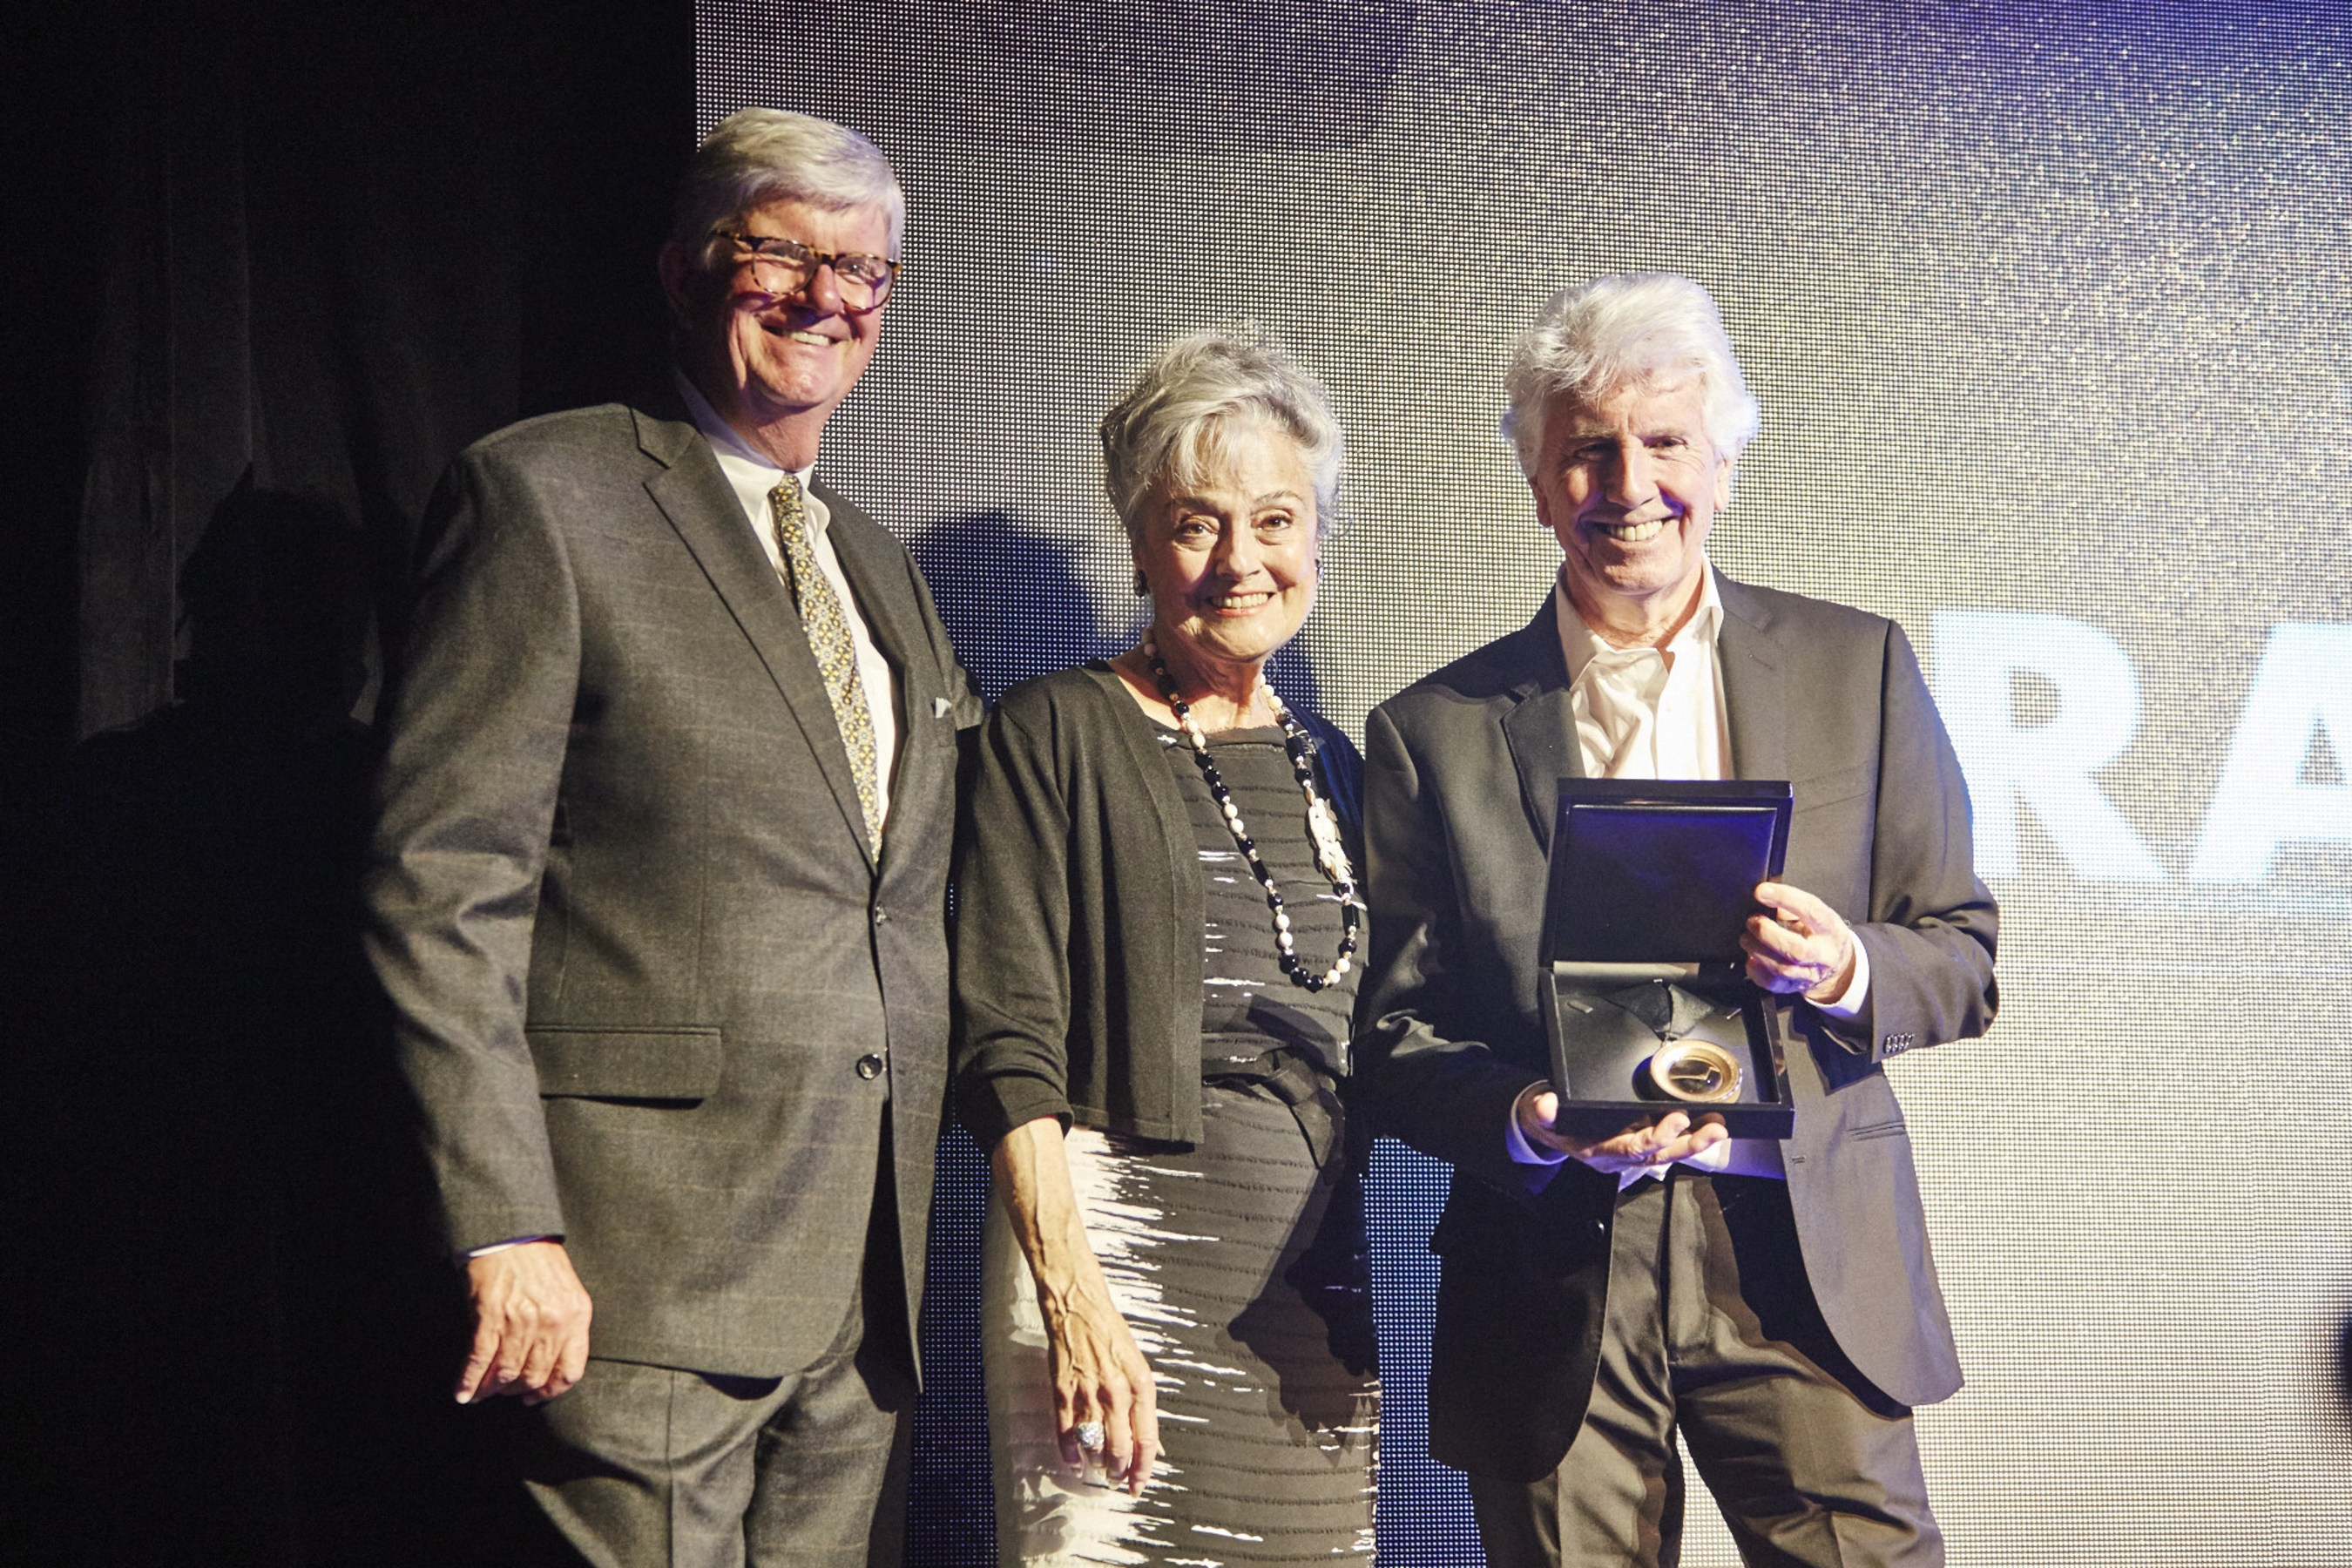 (From left to right) Bob Bishop, chairperson of the 2016 Hall of Fame selection committee and Anna Harris, president of the International Photography Hall of Fame and Museum's (IPHF) board of directors, congratulate Graham Nash on his induction into the IPHF, located in St. Louis, Mo.